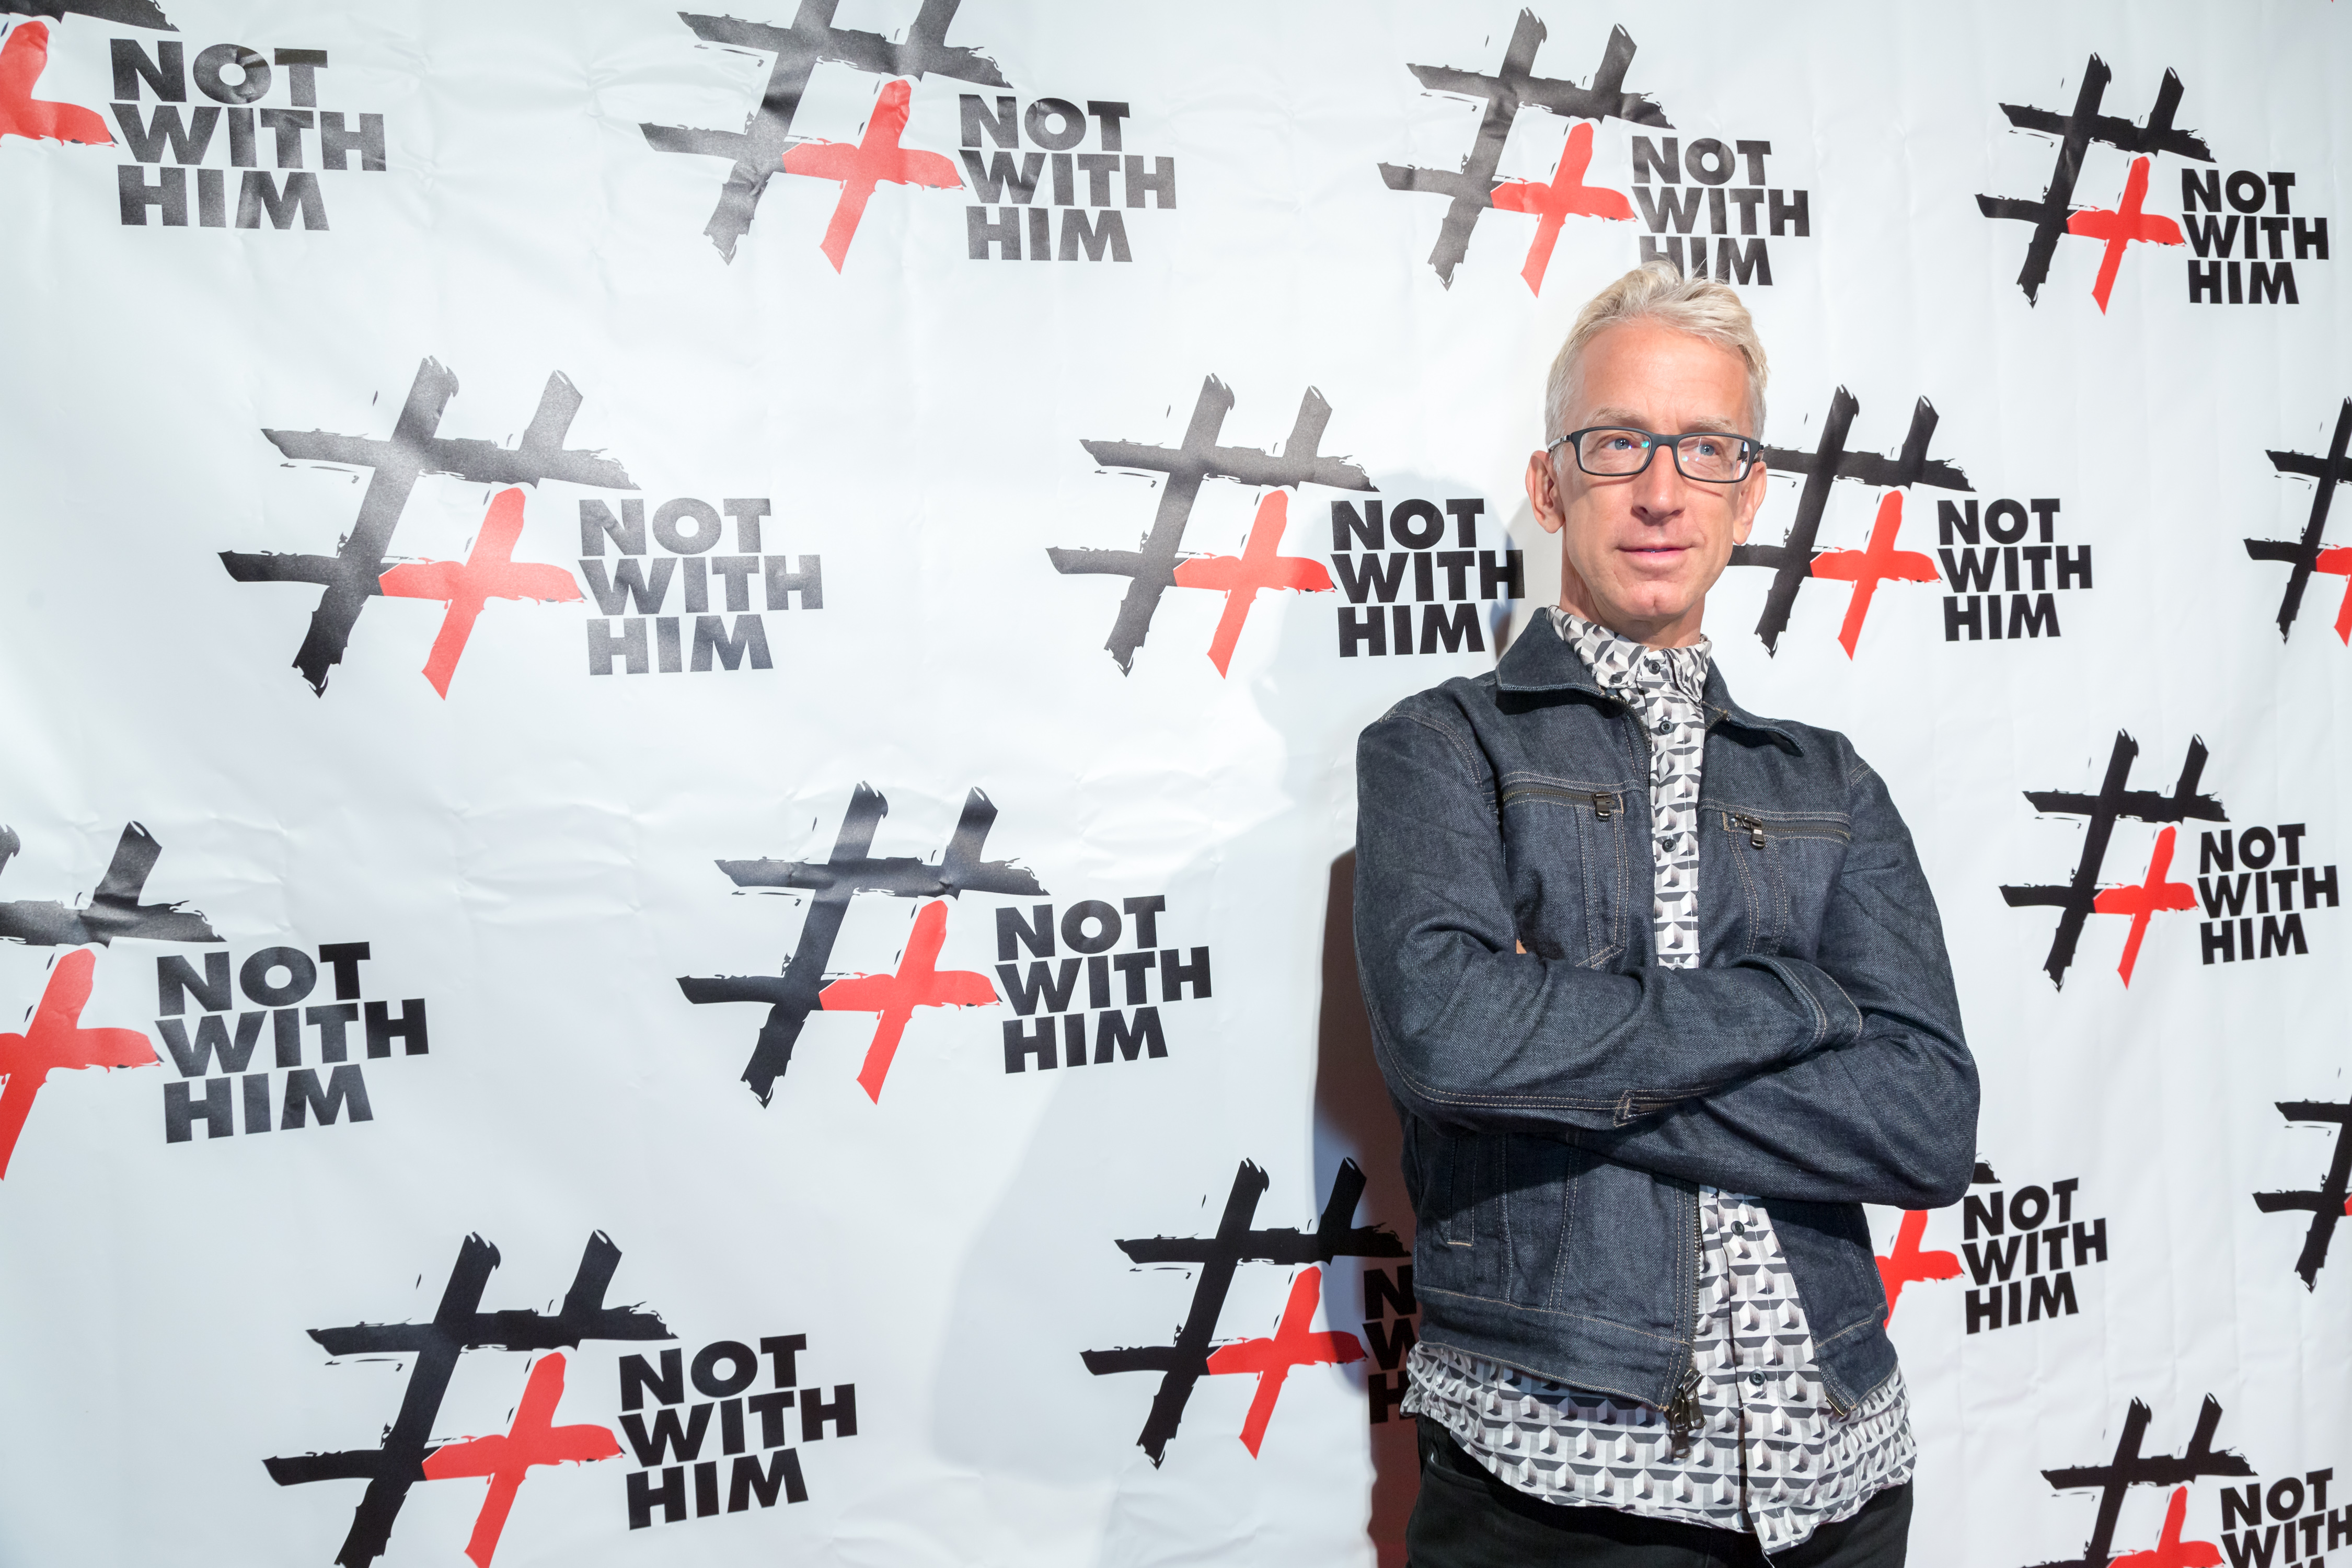 LOS ANGELES, CA - AUGUST 19: Comedian Andy Dick arrives at the #NotWithHim Event on August 19, 2016 in Los Angeles, California. (Photo by Greg Doherty/Getty Images) (Greg Doherty—Getty Images)